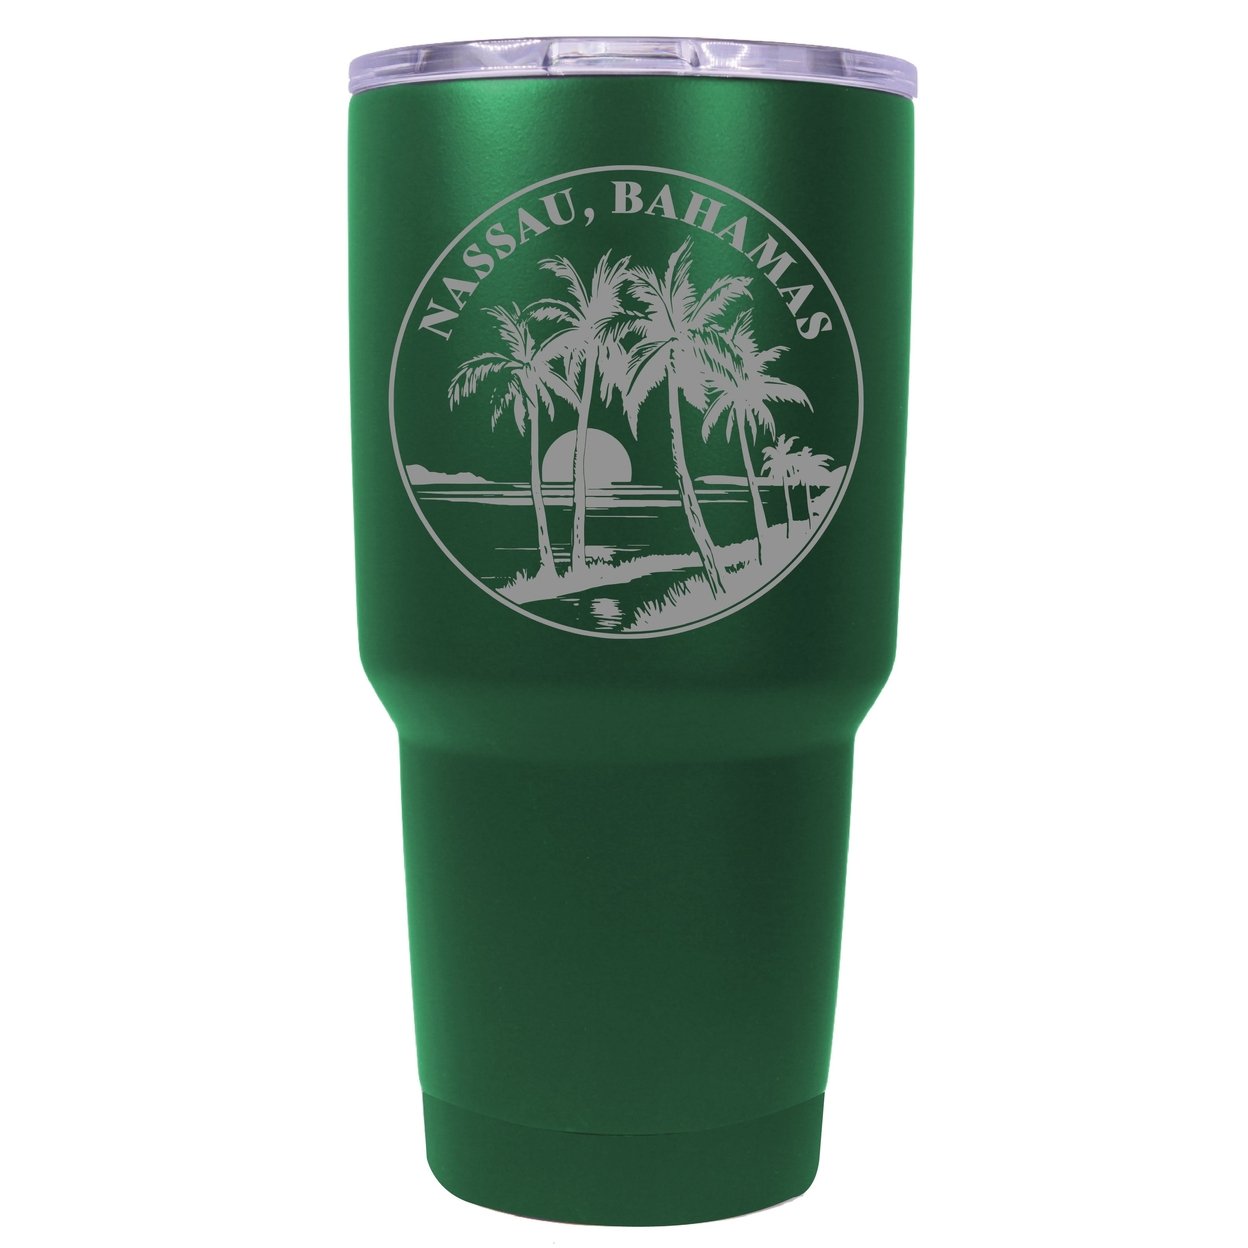 Nassau The Bahamas Souvenir 24 Oz Engraved Insulated Stainless Steel Tumbler - Green,,2-Pack